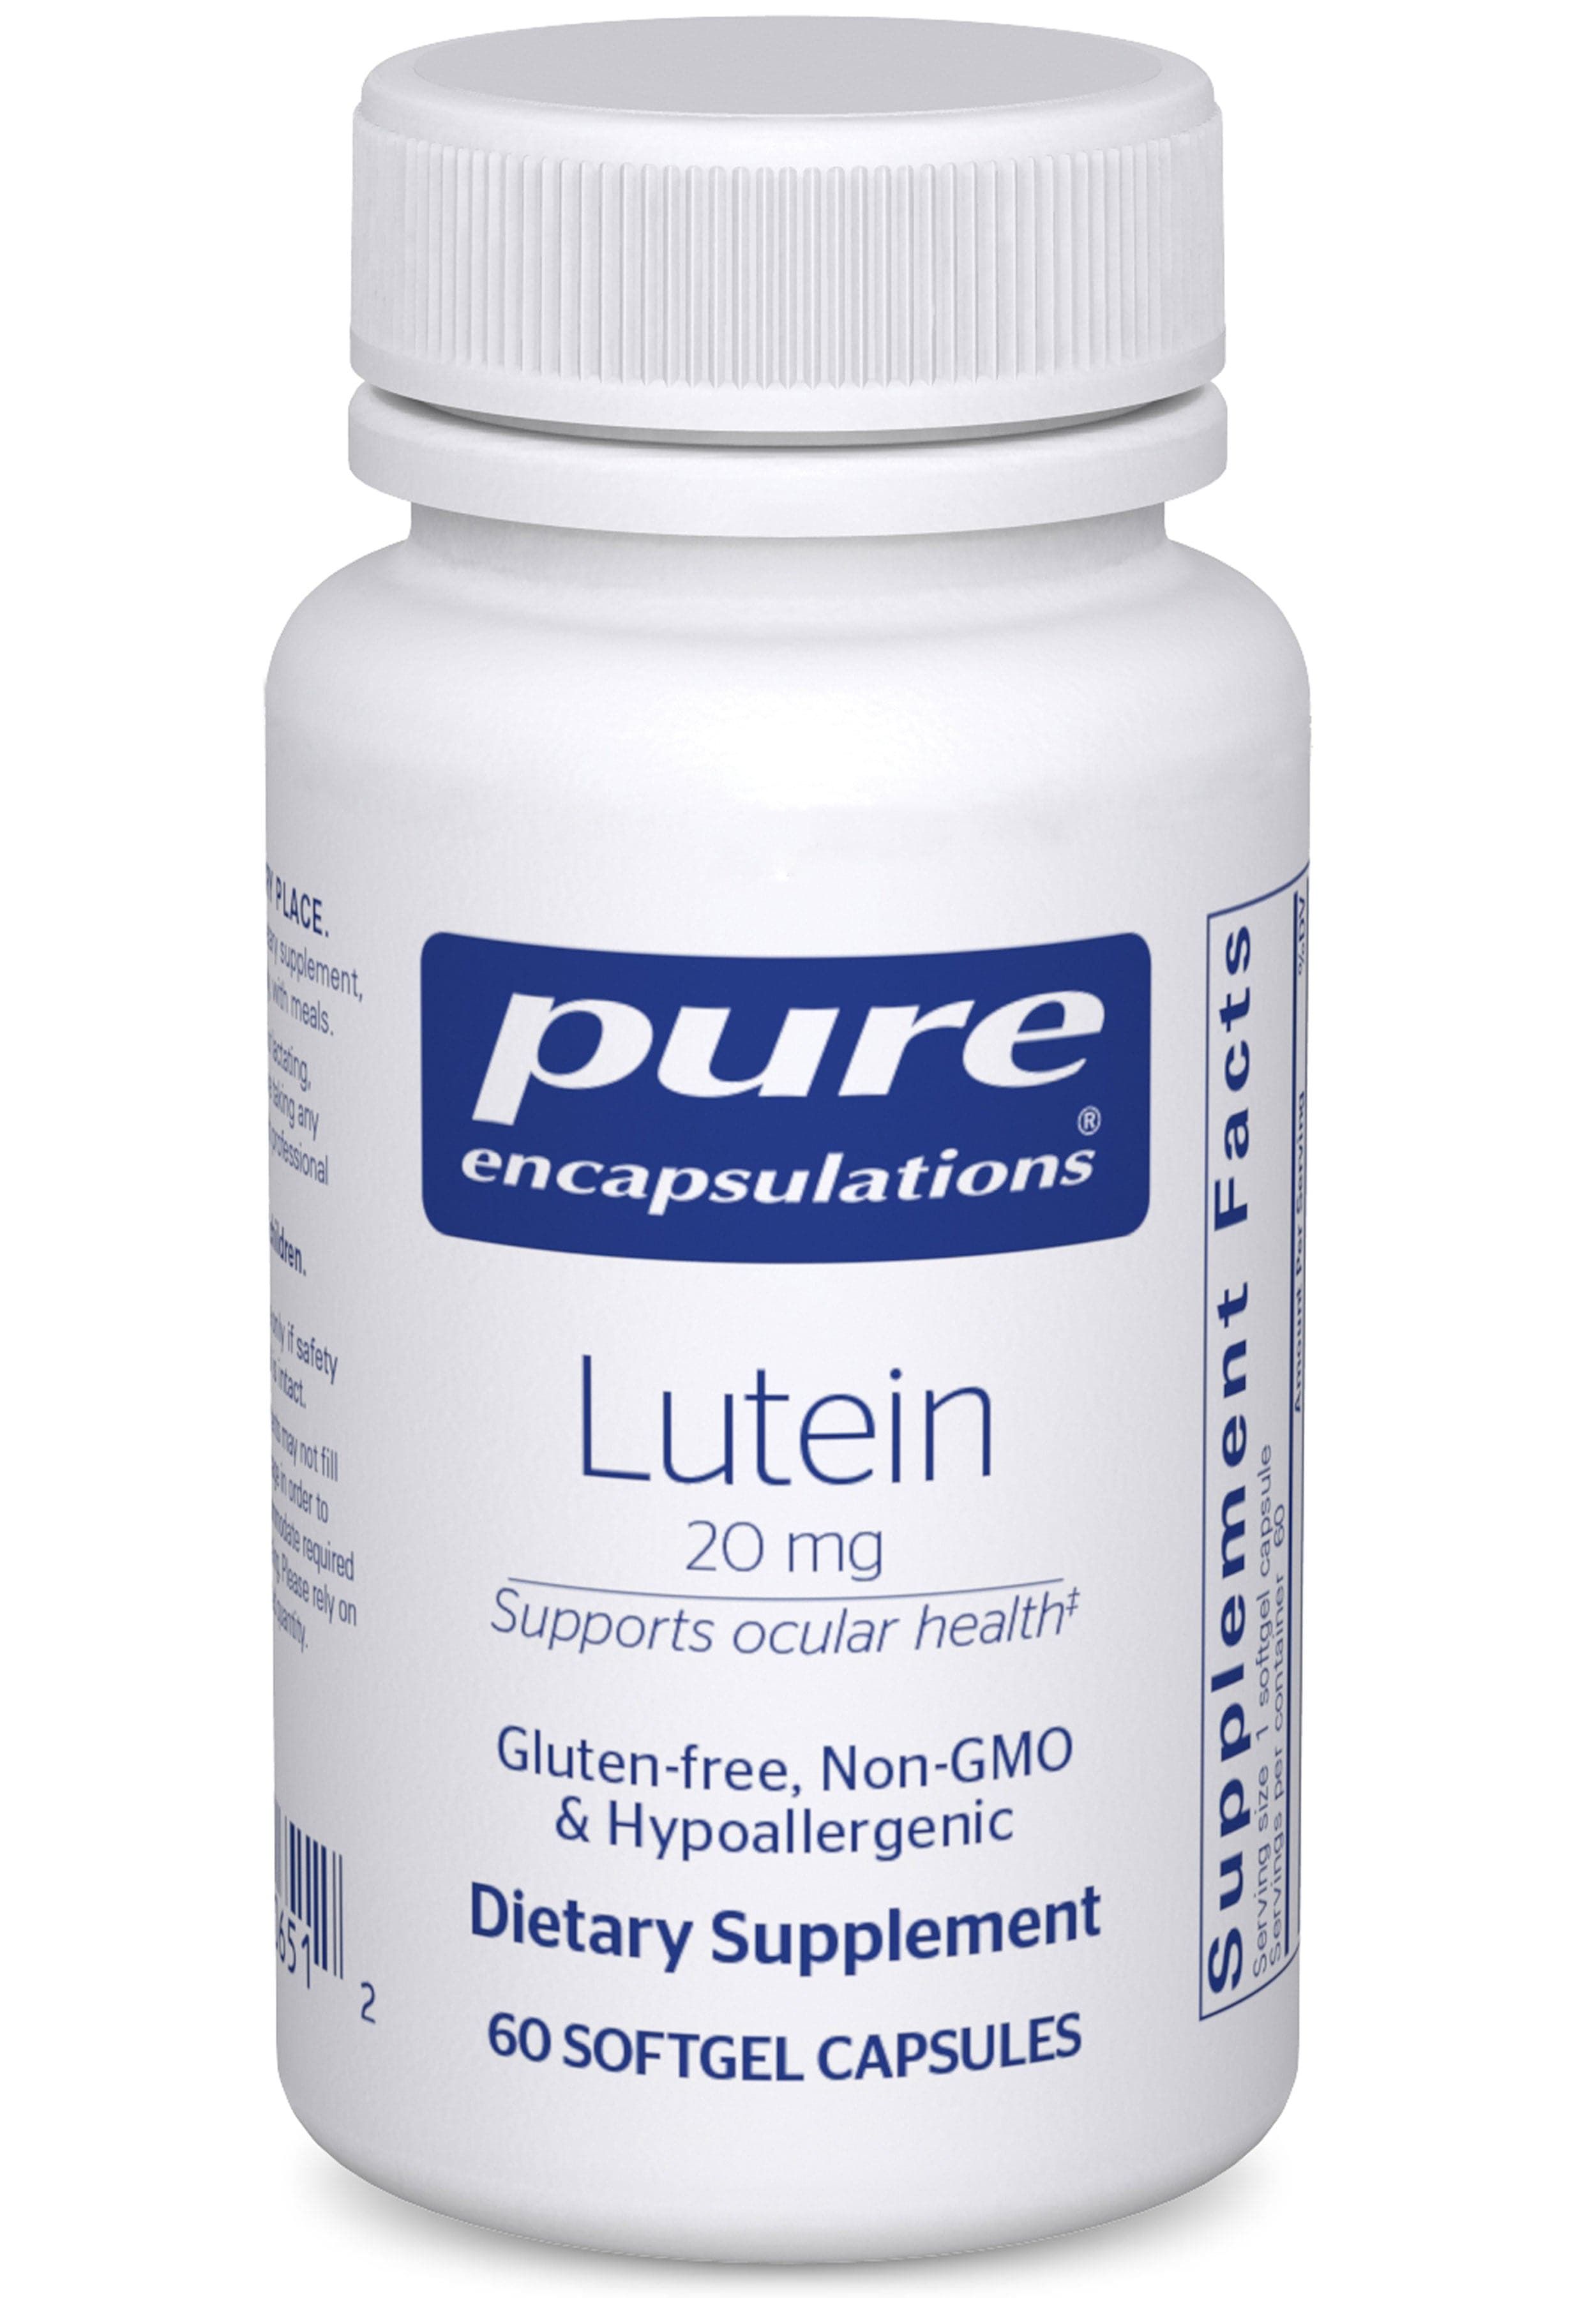 Pure Encapsulations Lutein 20 mg